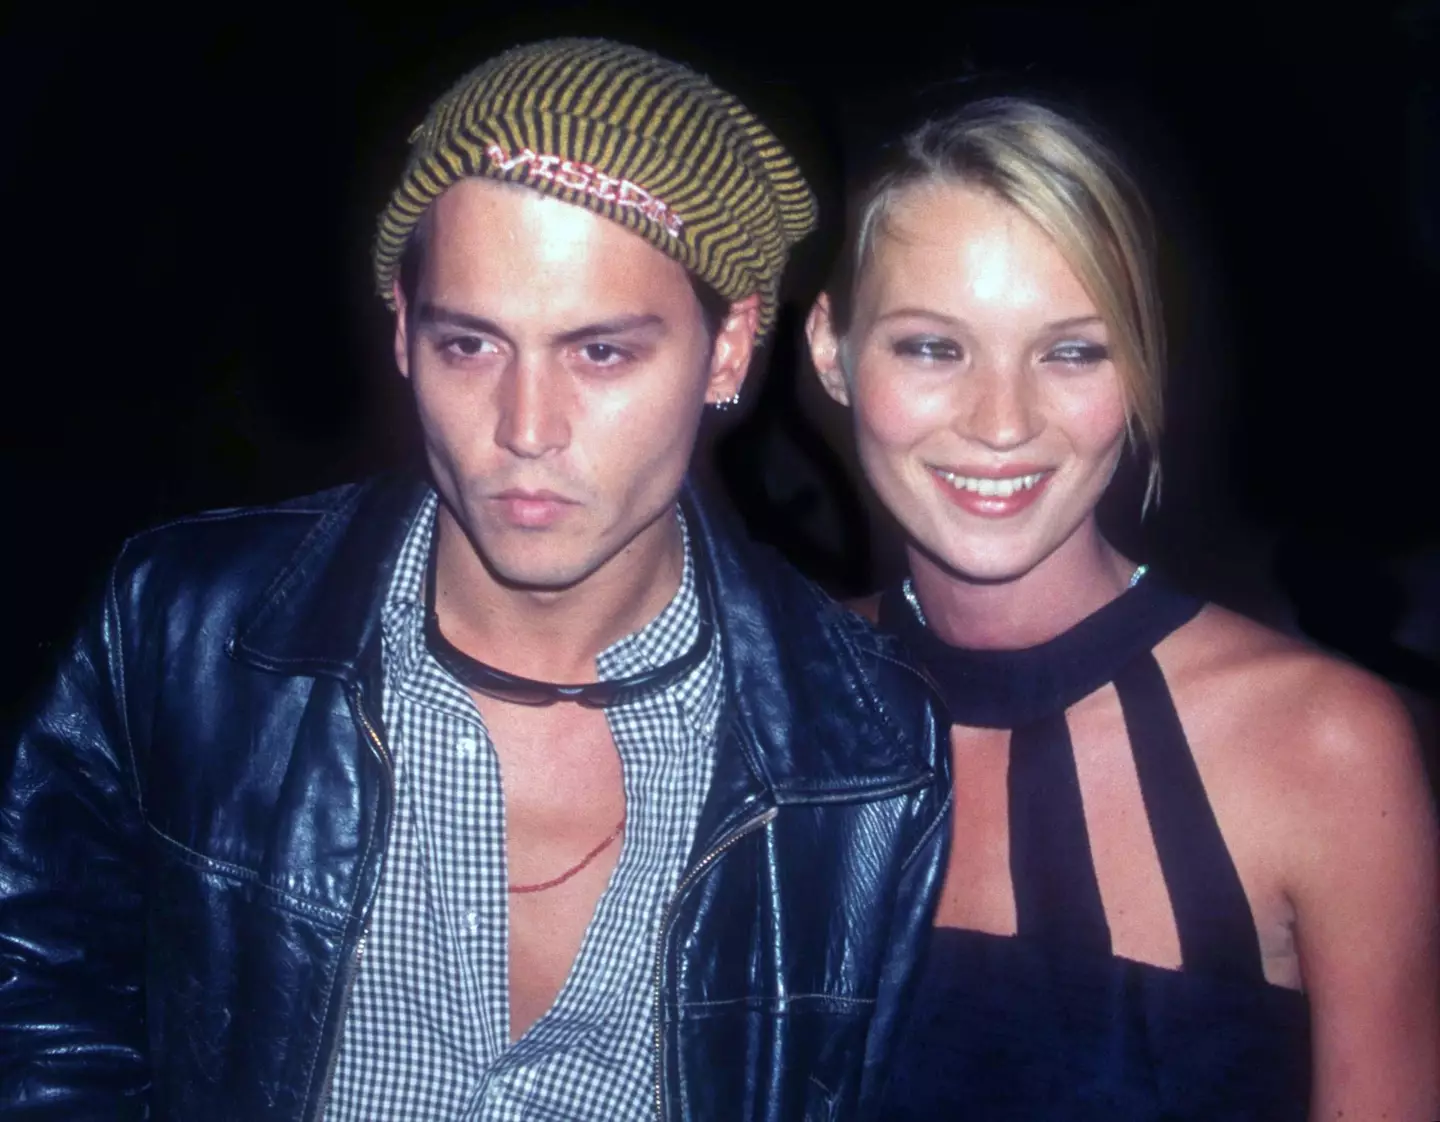 Kate Moss said she spent 'years and years' crying after her split with Johnny Depp.